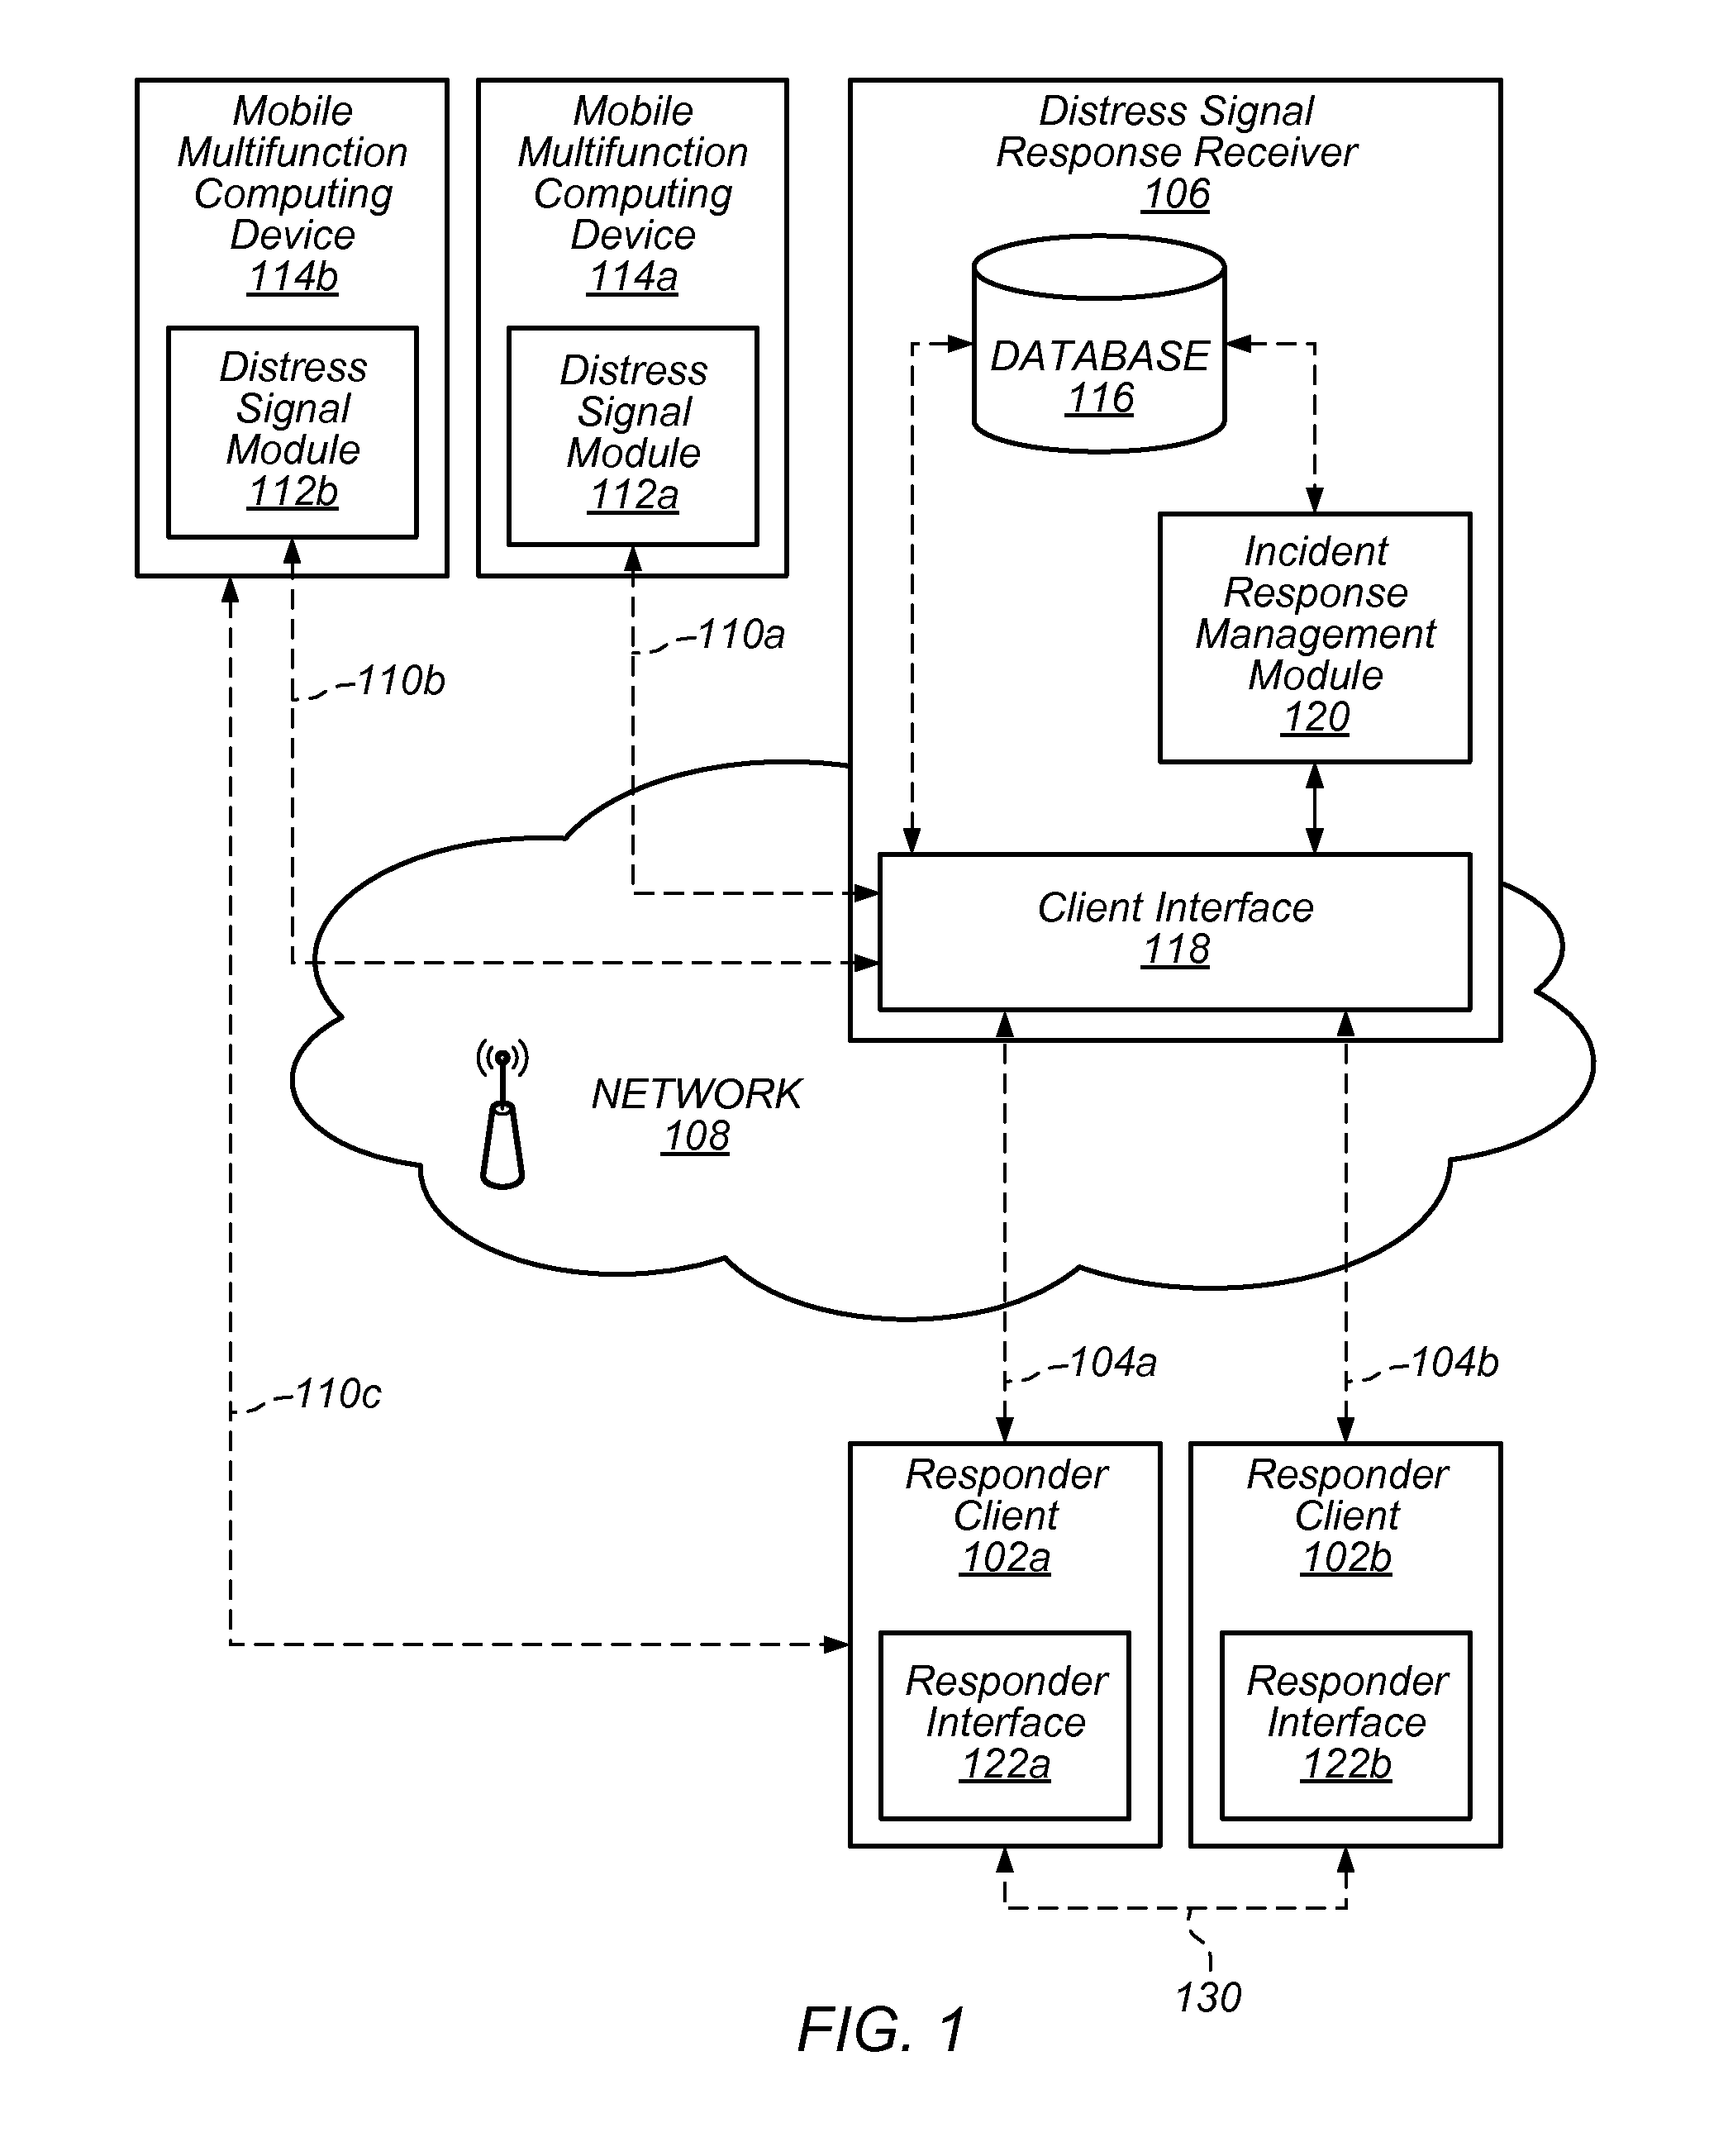 System and method for automated response to distress signal